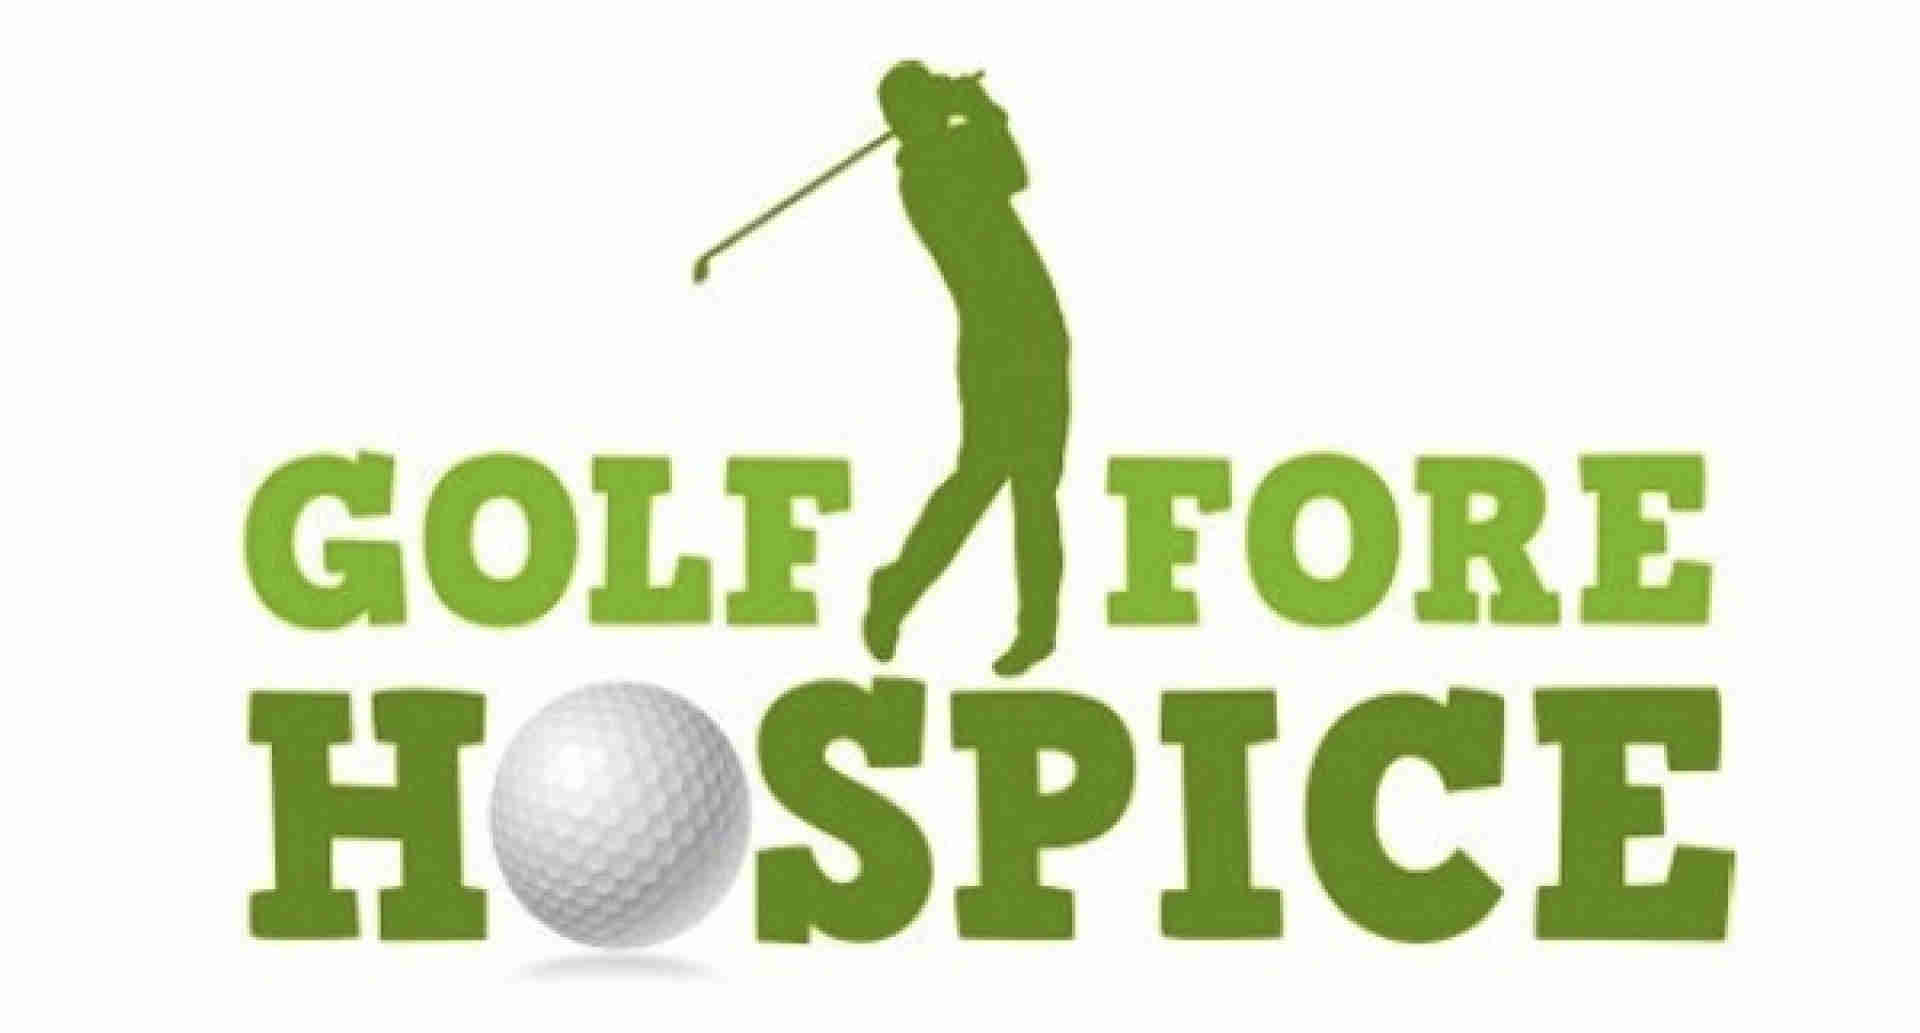 Heart House Golf Fore Hospice  - golf-fore-hospice-logo